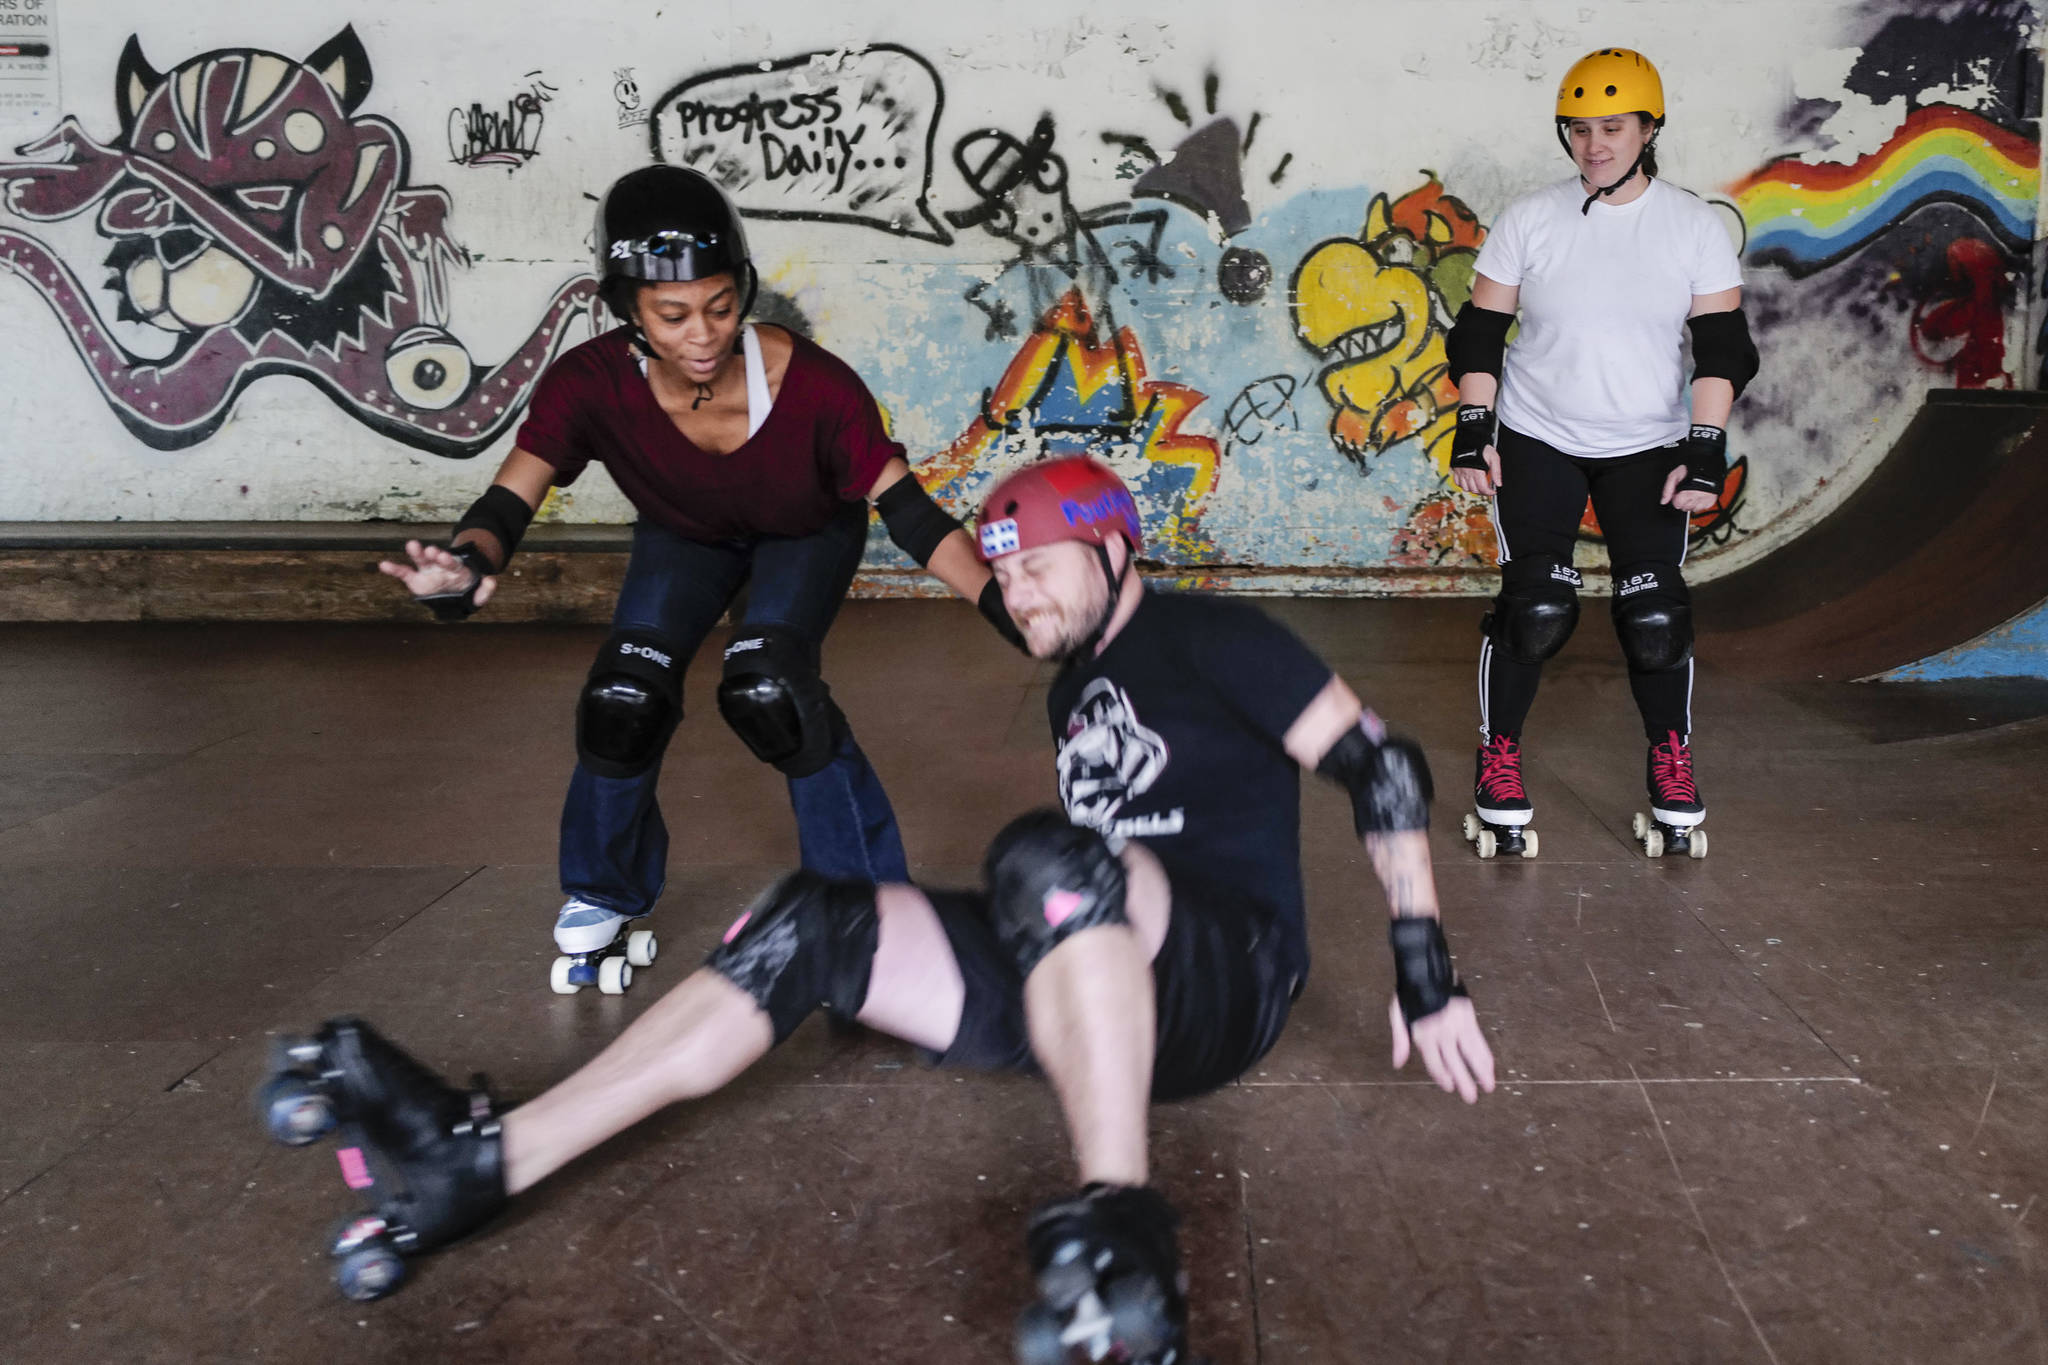 Empire reporter Michael S. Lockett takes a fall while being taught to rollerskate by Jennifer Gross, right, and Shabadrang Khalsa, at the Pipeline Skate Park on Friday, Oct. 11, 2019. (Michael Penn | Juneau Empire)